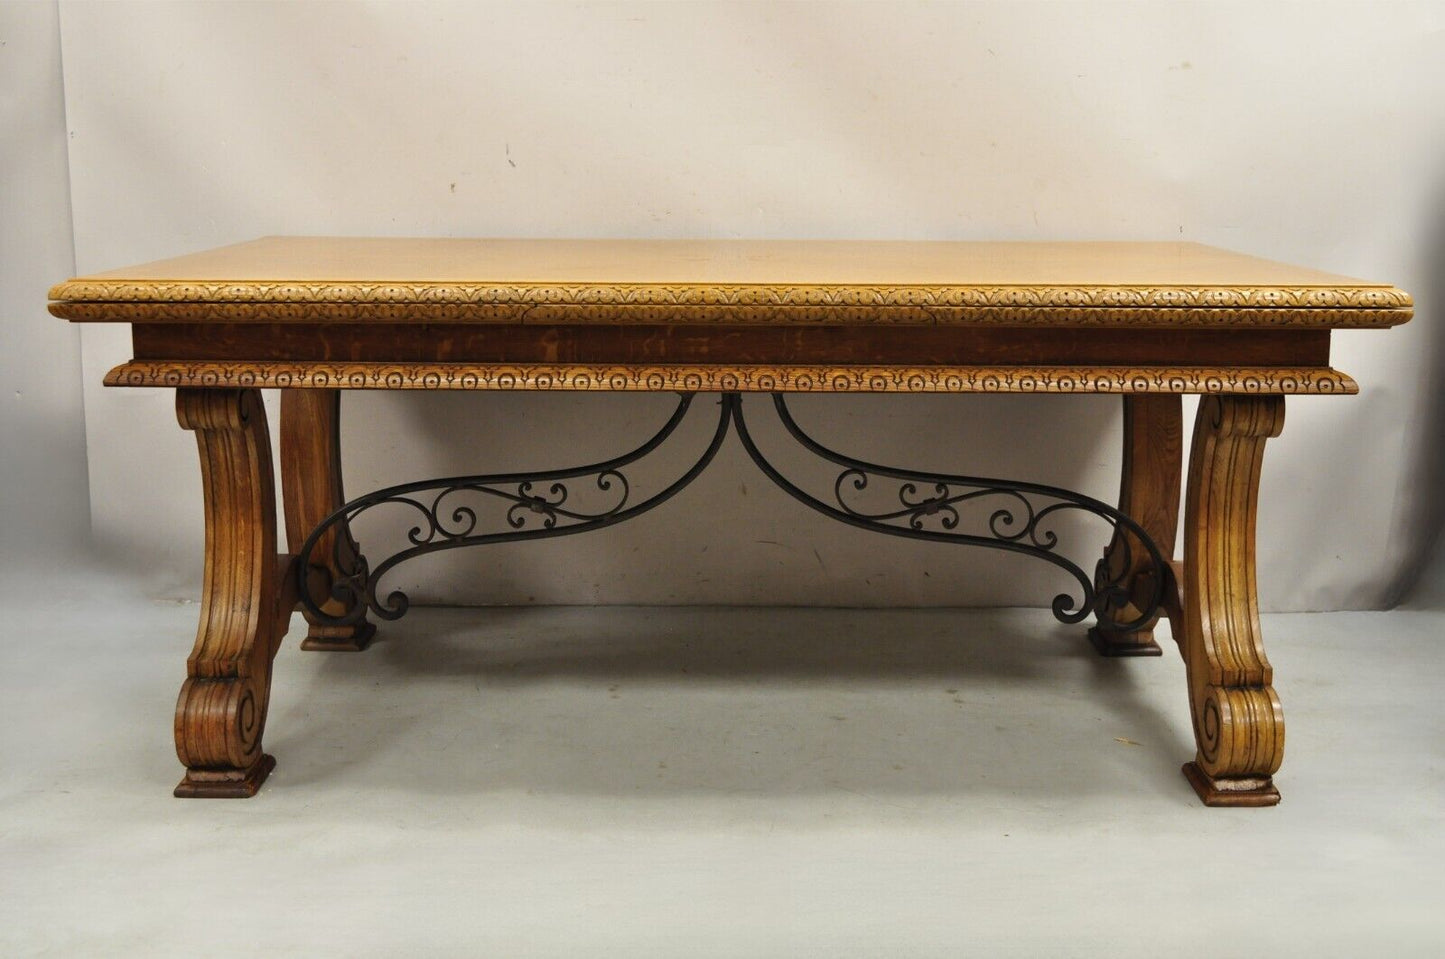 Antique Spanish Baroque Jacobean Oak Wood Refectory Extension Dining Table